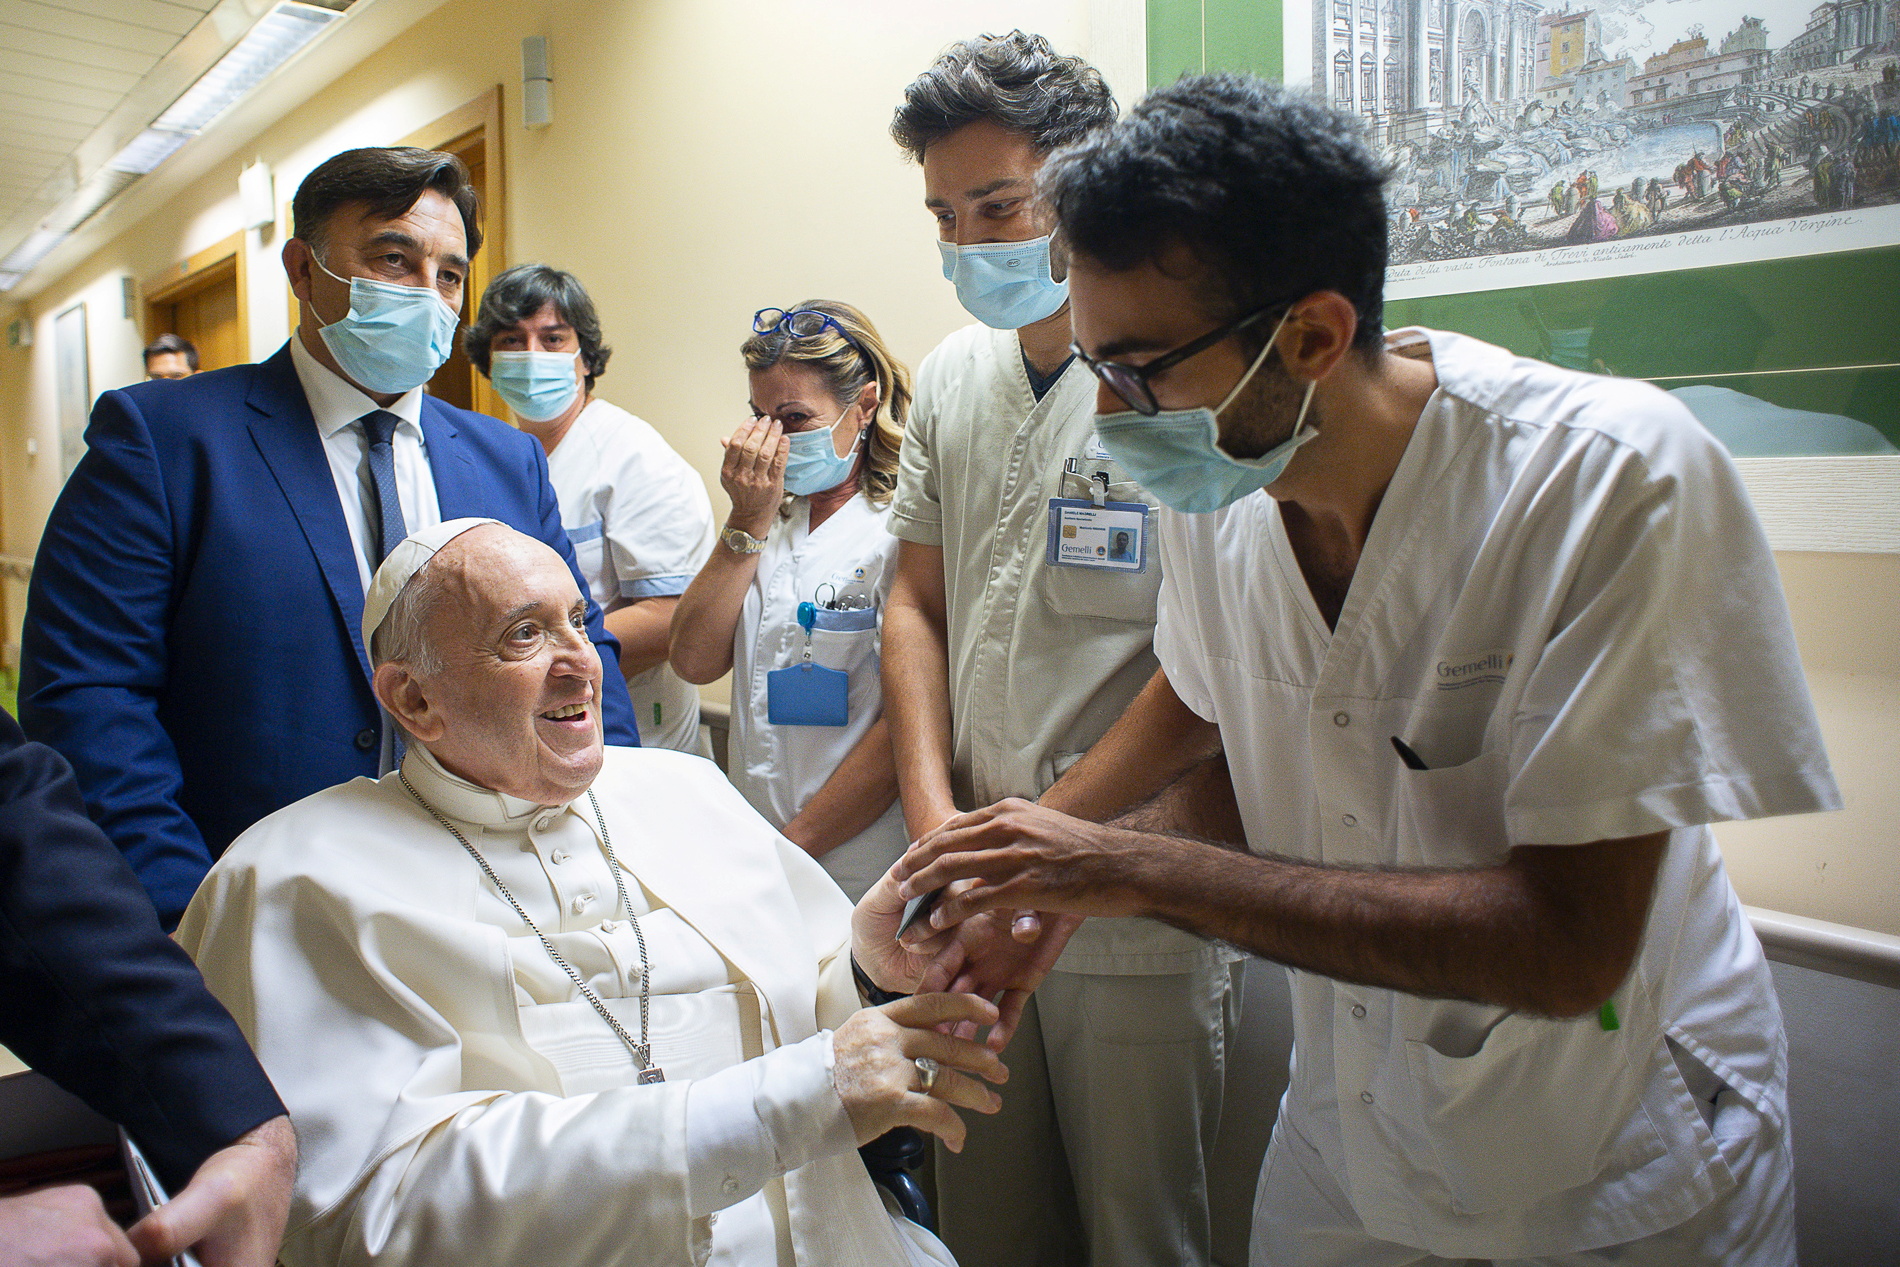 Pope Francis recovers following scheduled surgery in the Gemelli hospital in Rome